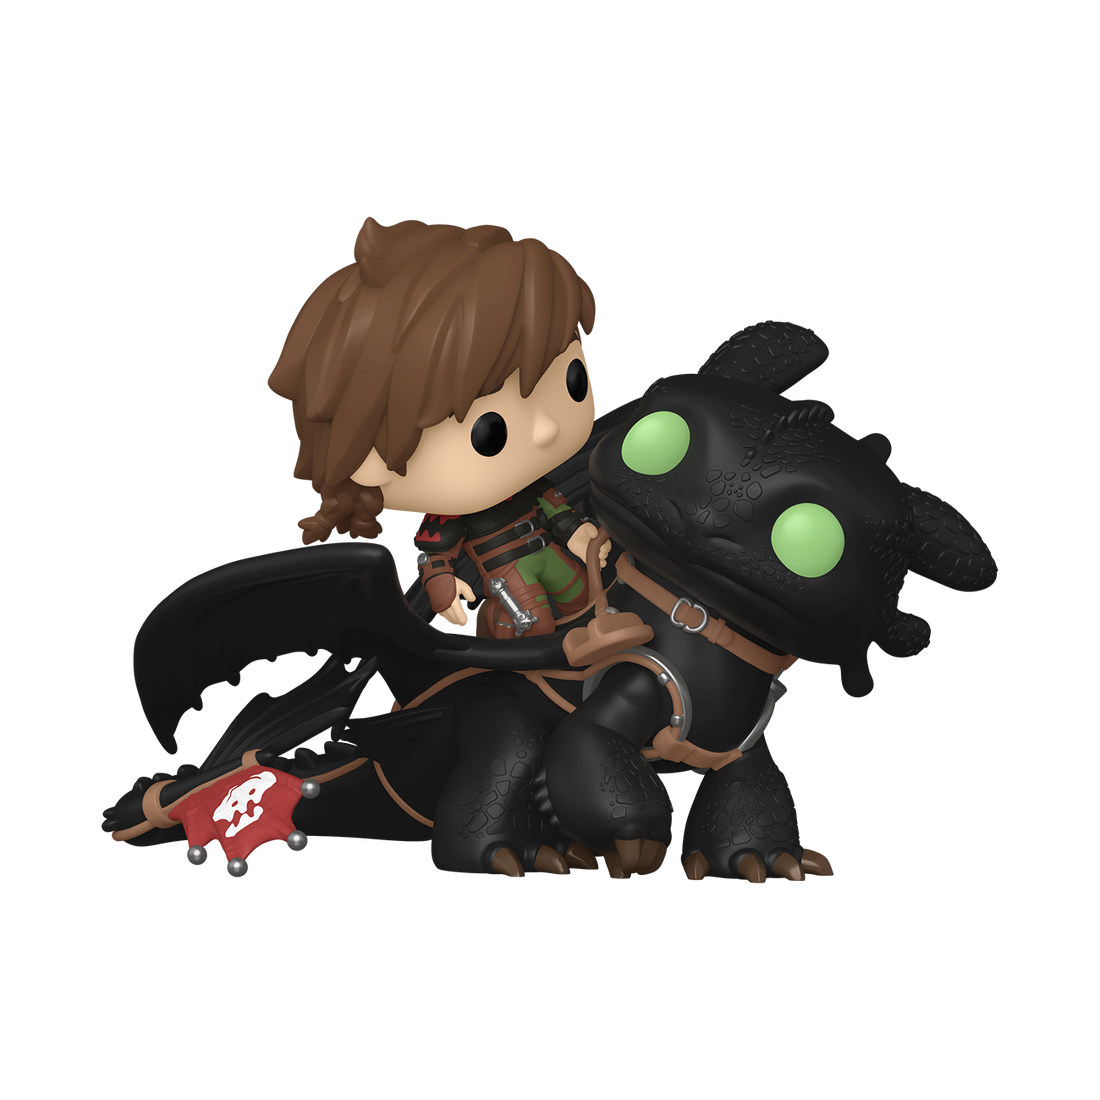 Funko Pop! Rides How To Train Your Dragon 2 123 Hiccup with Toothless Funko